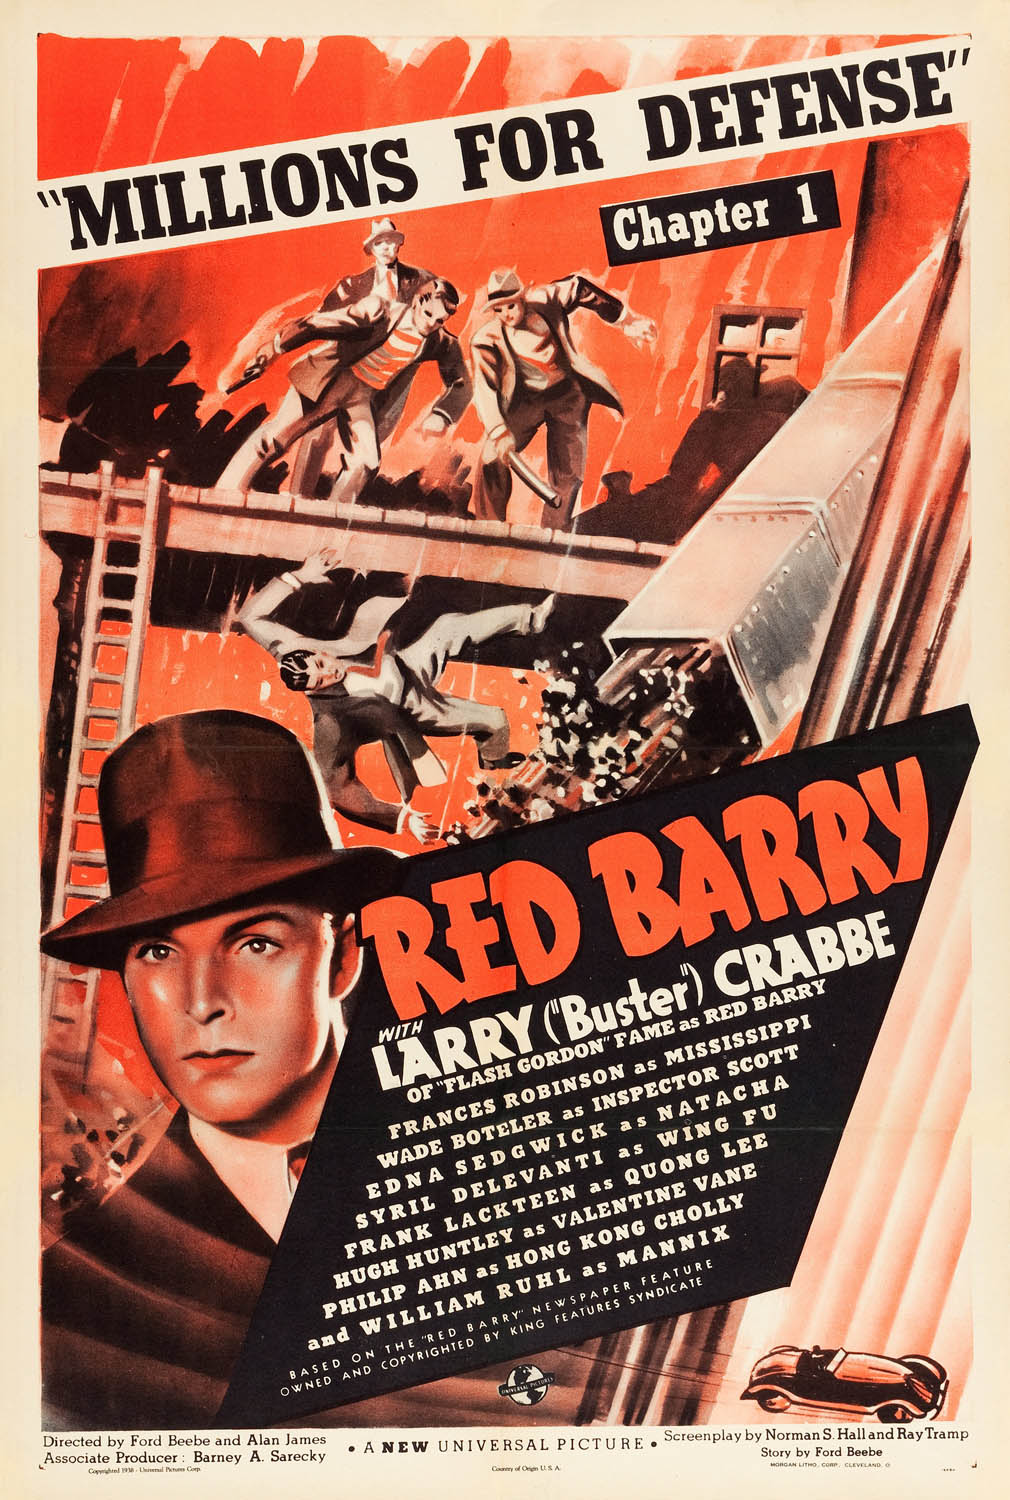 RED BARRY